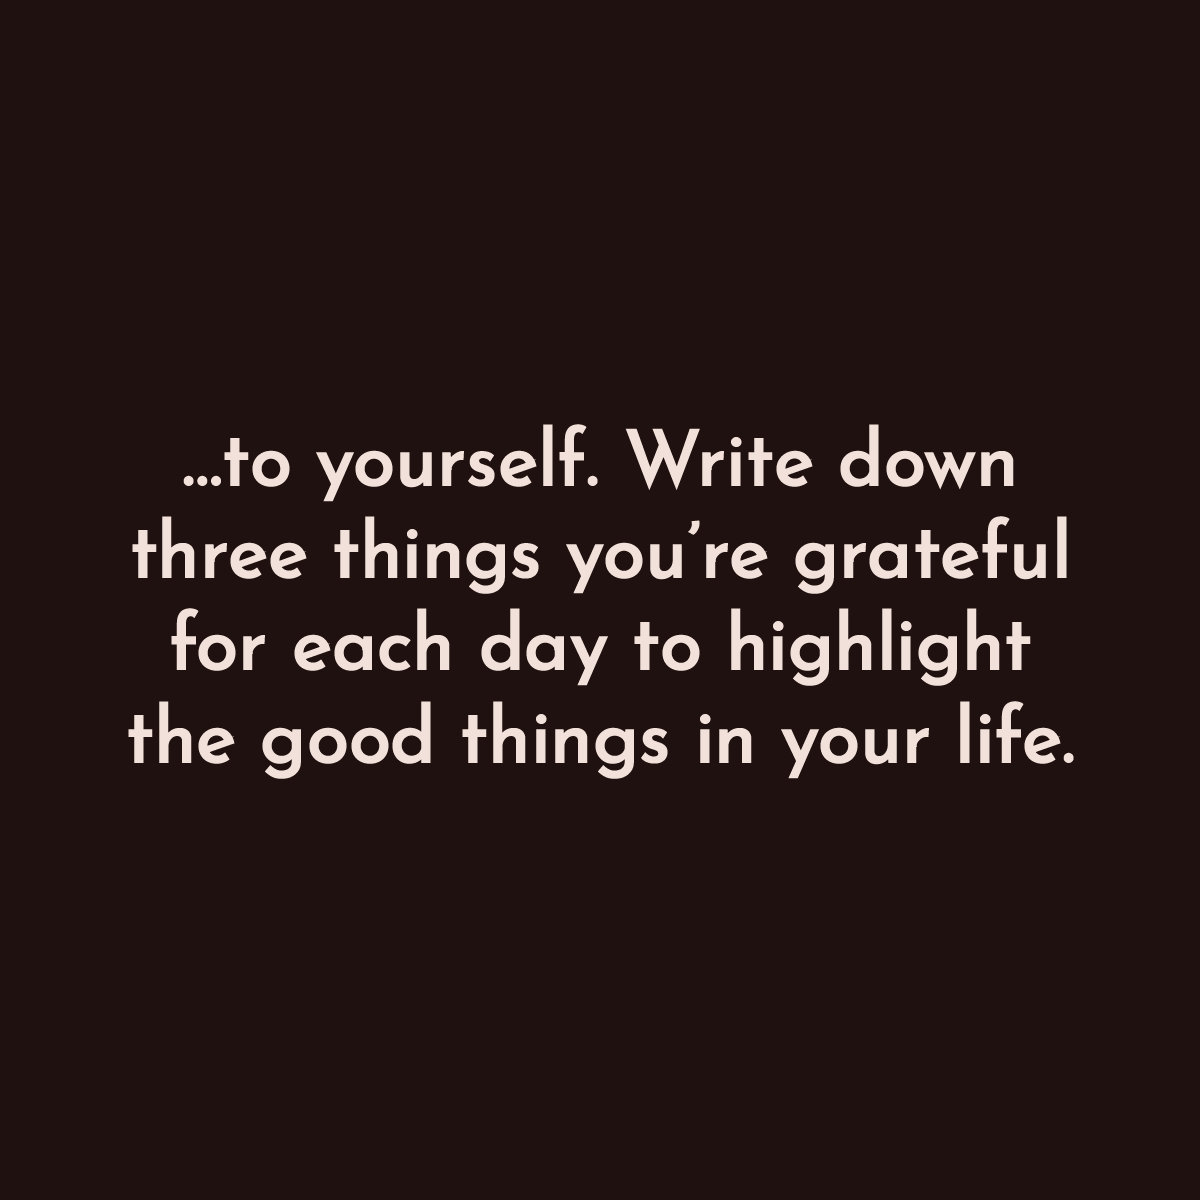 ...to yourself. Write Down three things you're grateful for each day to highlight the good things in your life.